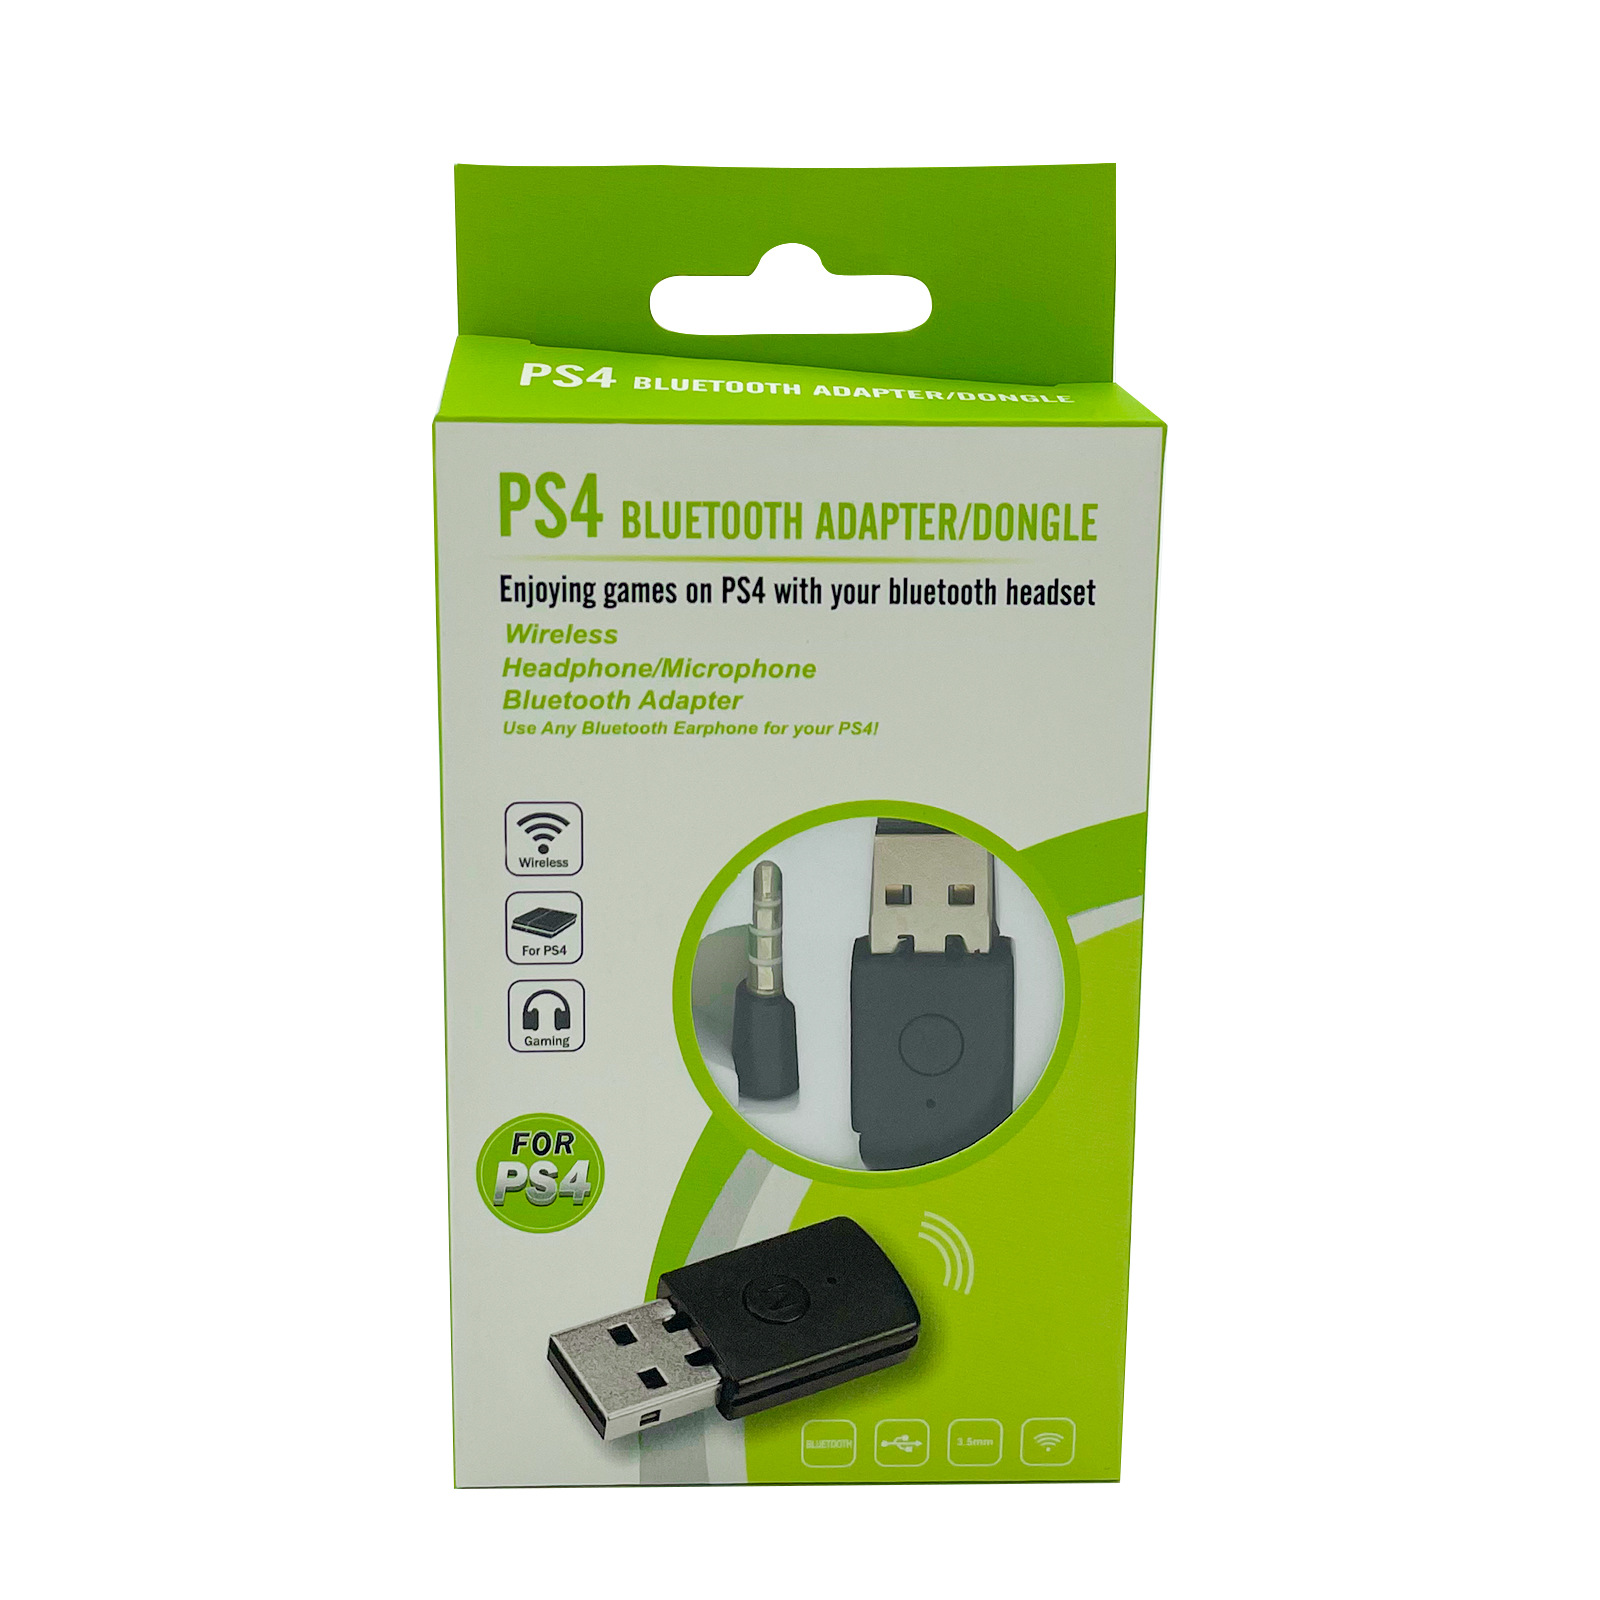 PS4 Bluetooth 4.0usb adapter PS4 Bluetooth headset receiver ps4 receiver in stock